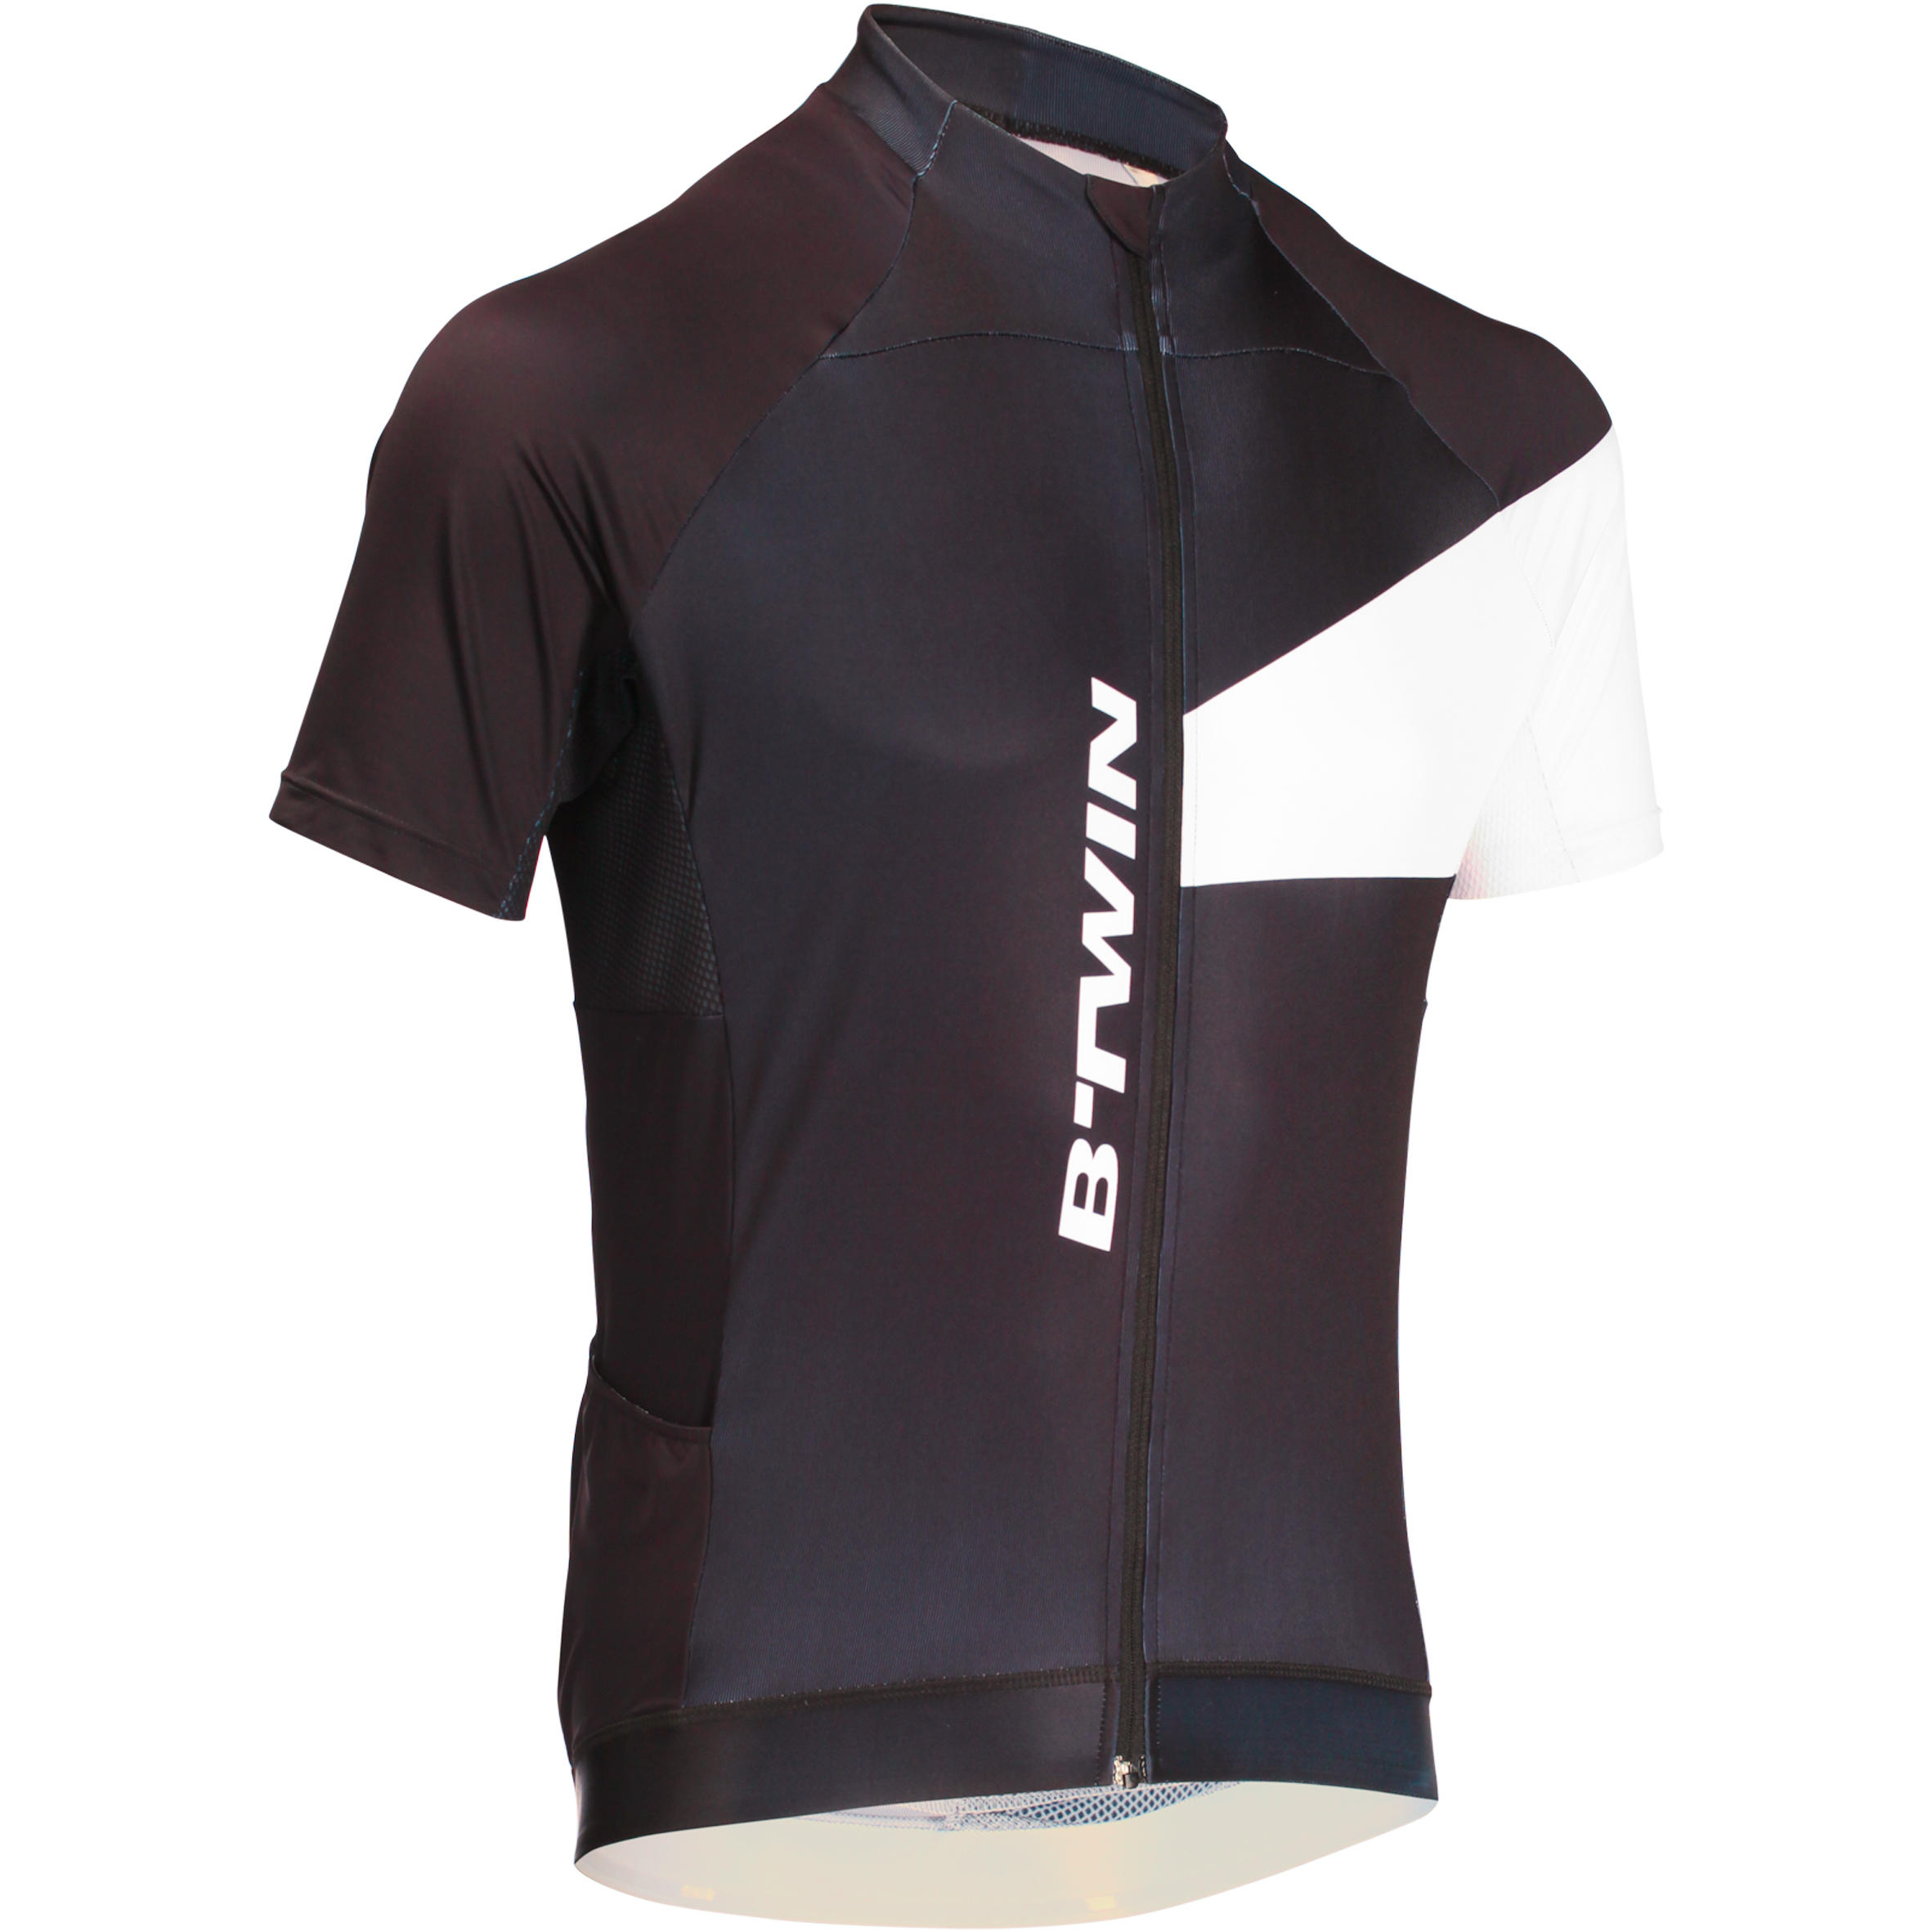 BTWIN 700 Short-Sleeved Cycling Jersey - Black/White